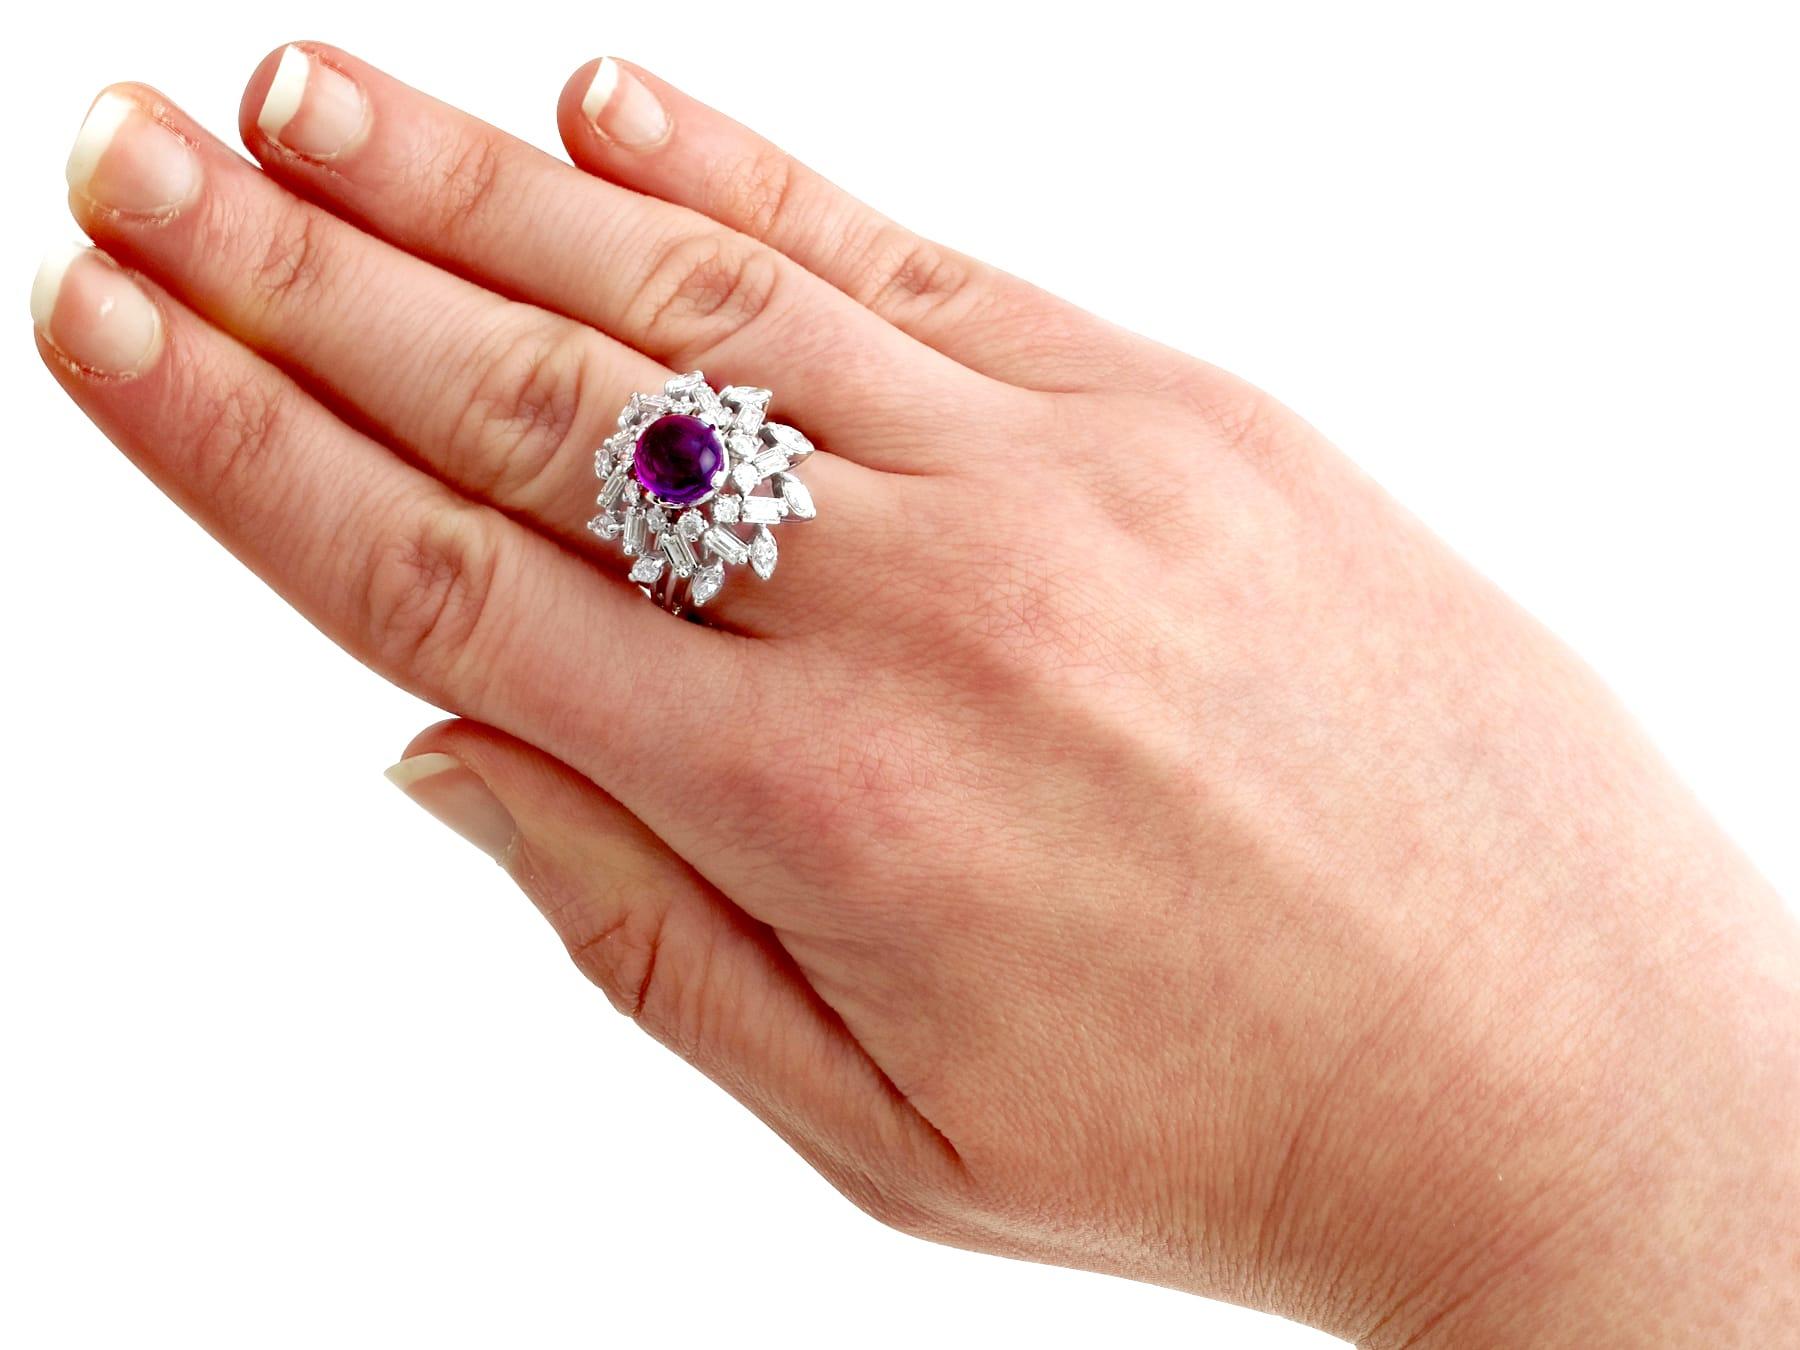 Cabochon Vintage 1950s 2.15 Carat Amethyst 2.13 Carat Diamond White Gold Cocktail Ring For Sale